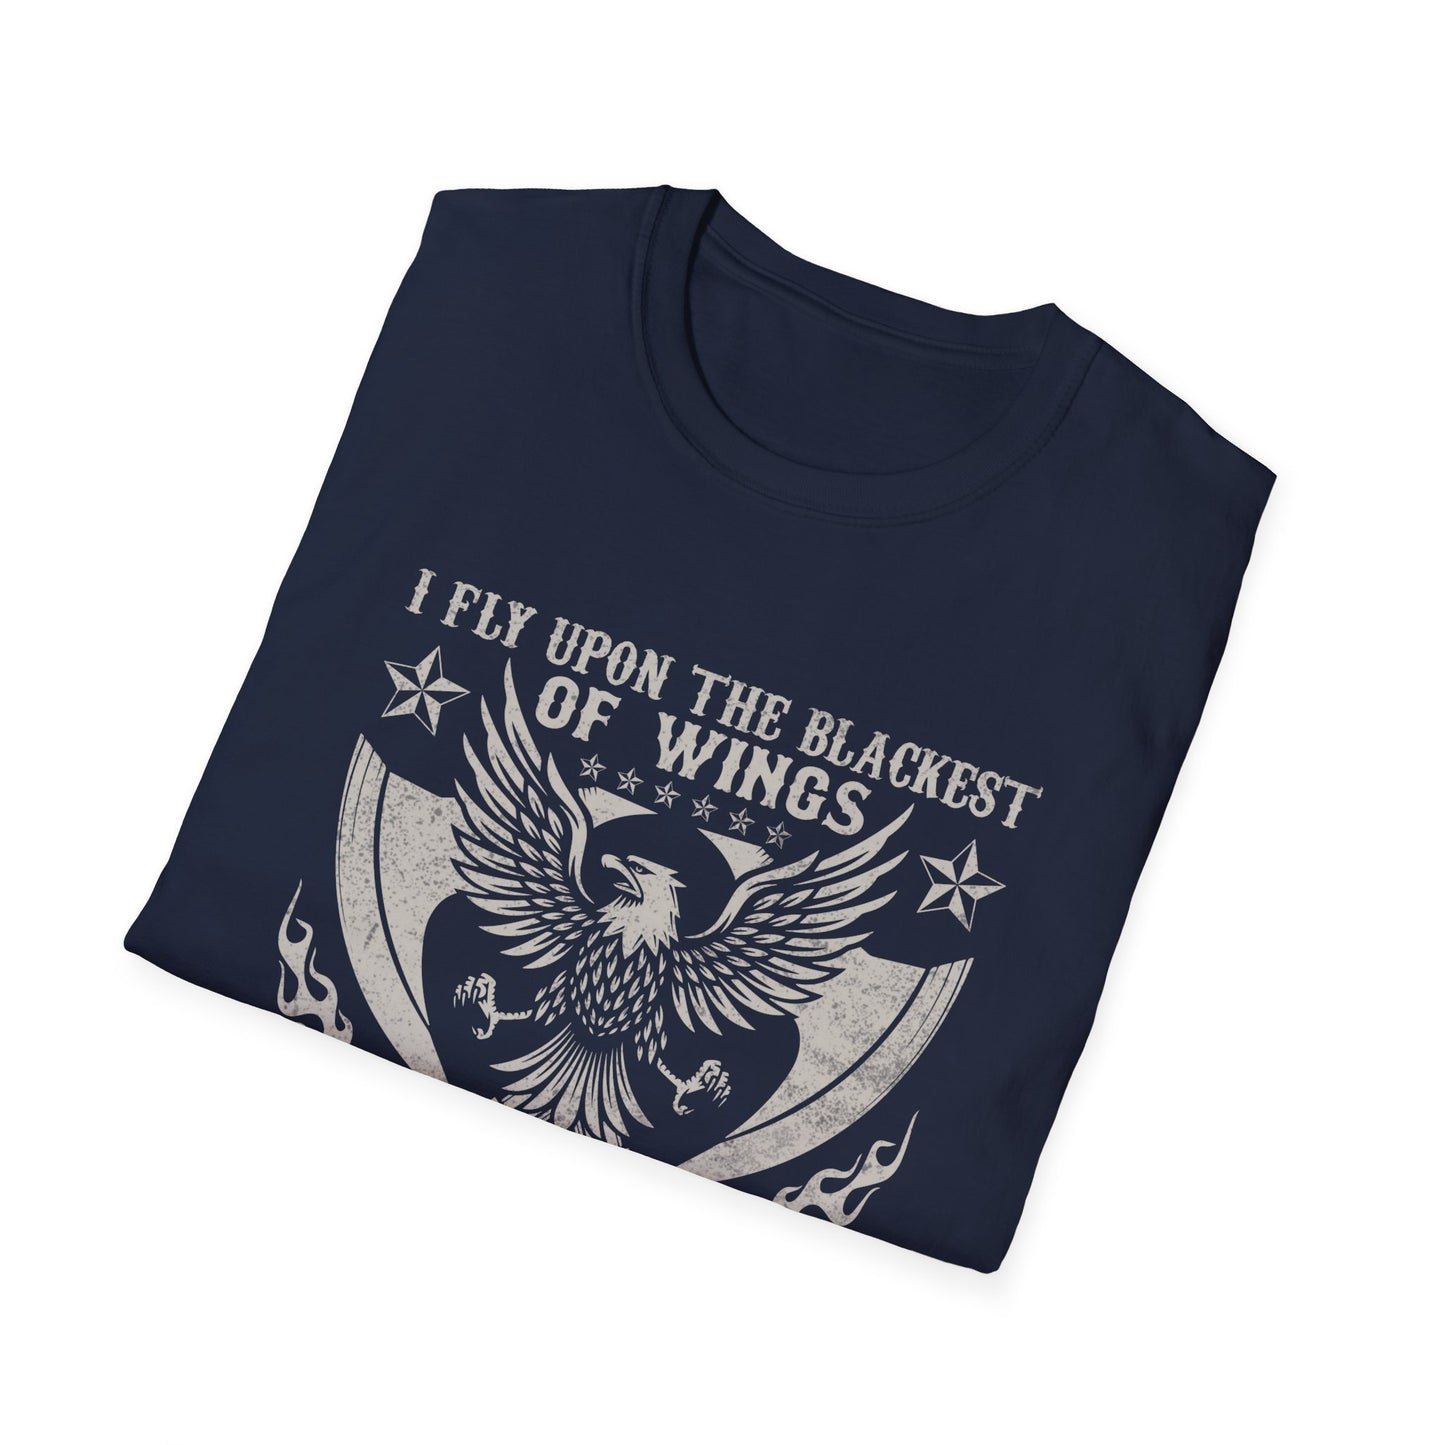 I Fly Upon The Blackest Of Wings I Soar Through The Dark Night Sky I Answer No Call But My Own I Alone Force My Reality For I Am The Raven The Child Of Odin Viking T-Shirt